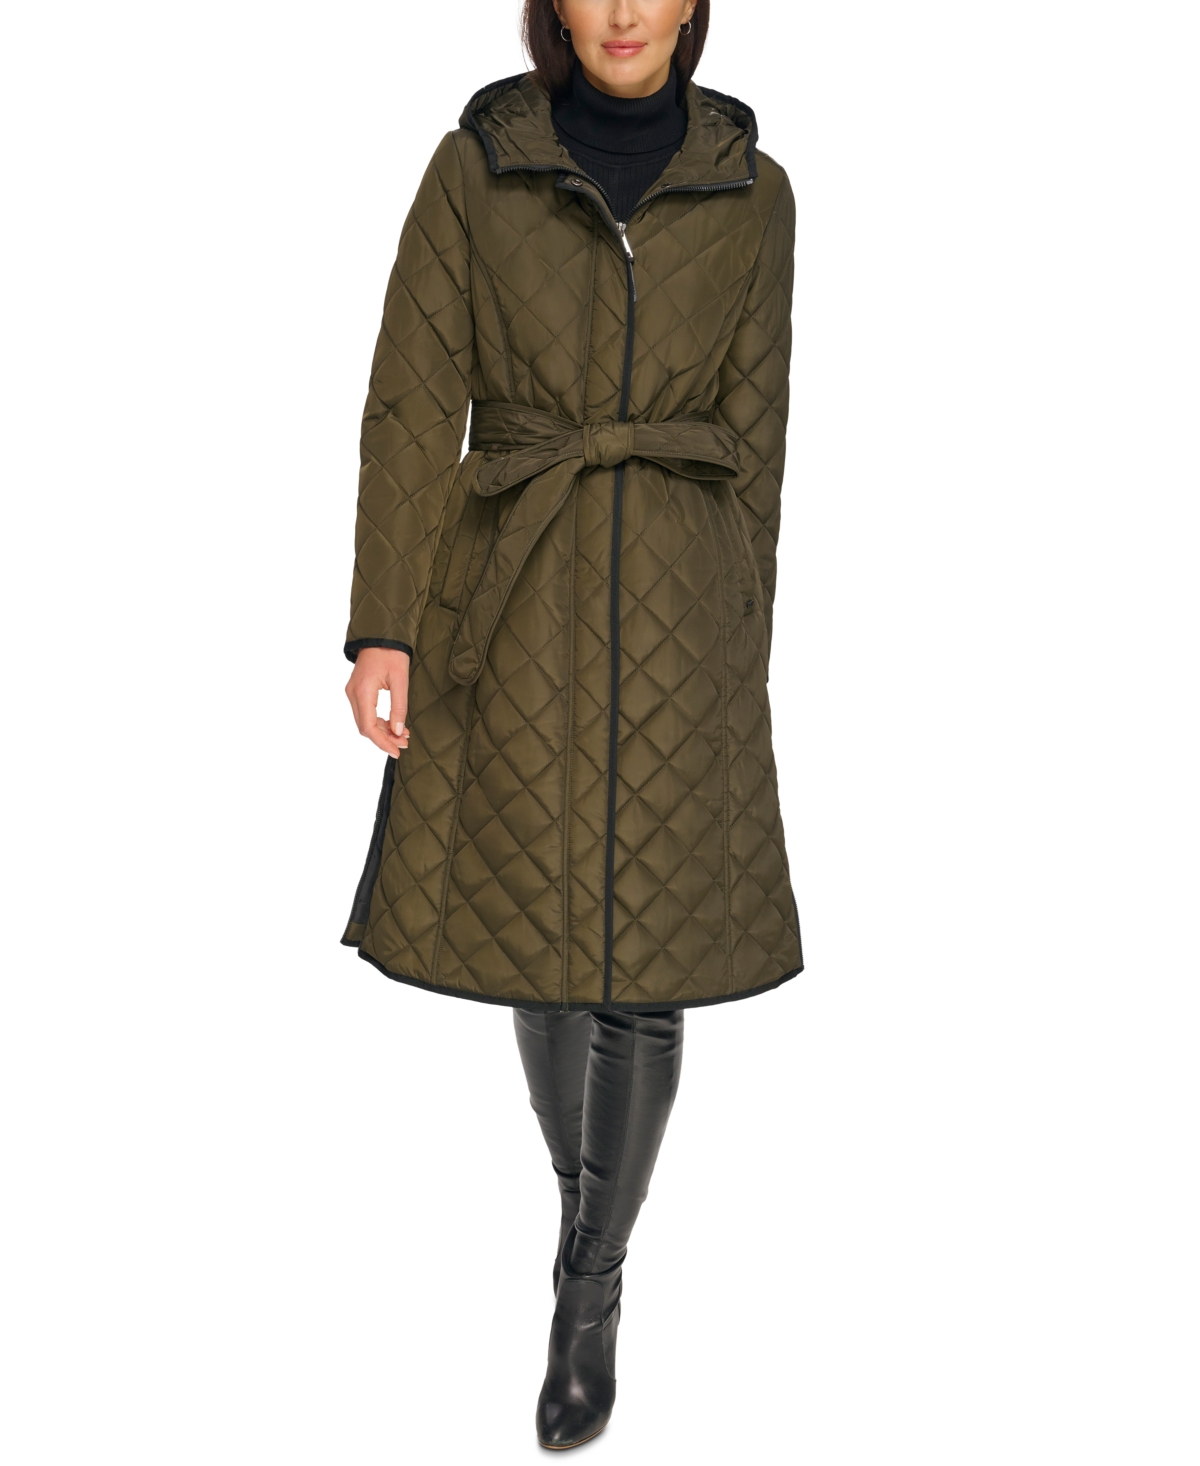 Dkny Petite Hooded Belted Quilted Coat In Loden